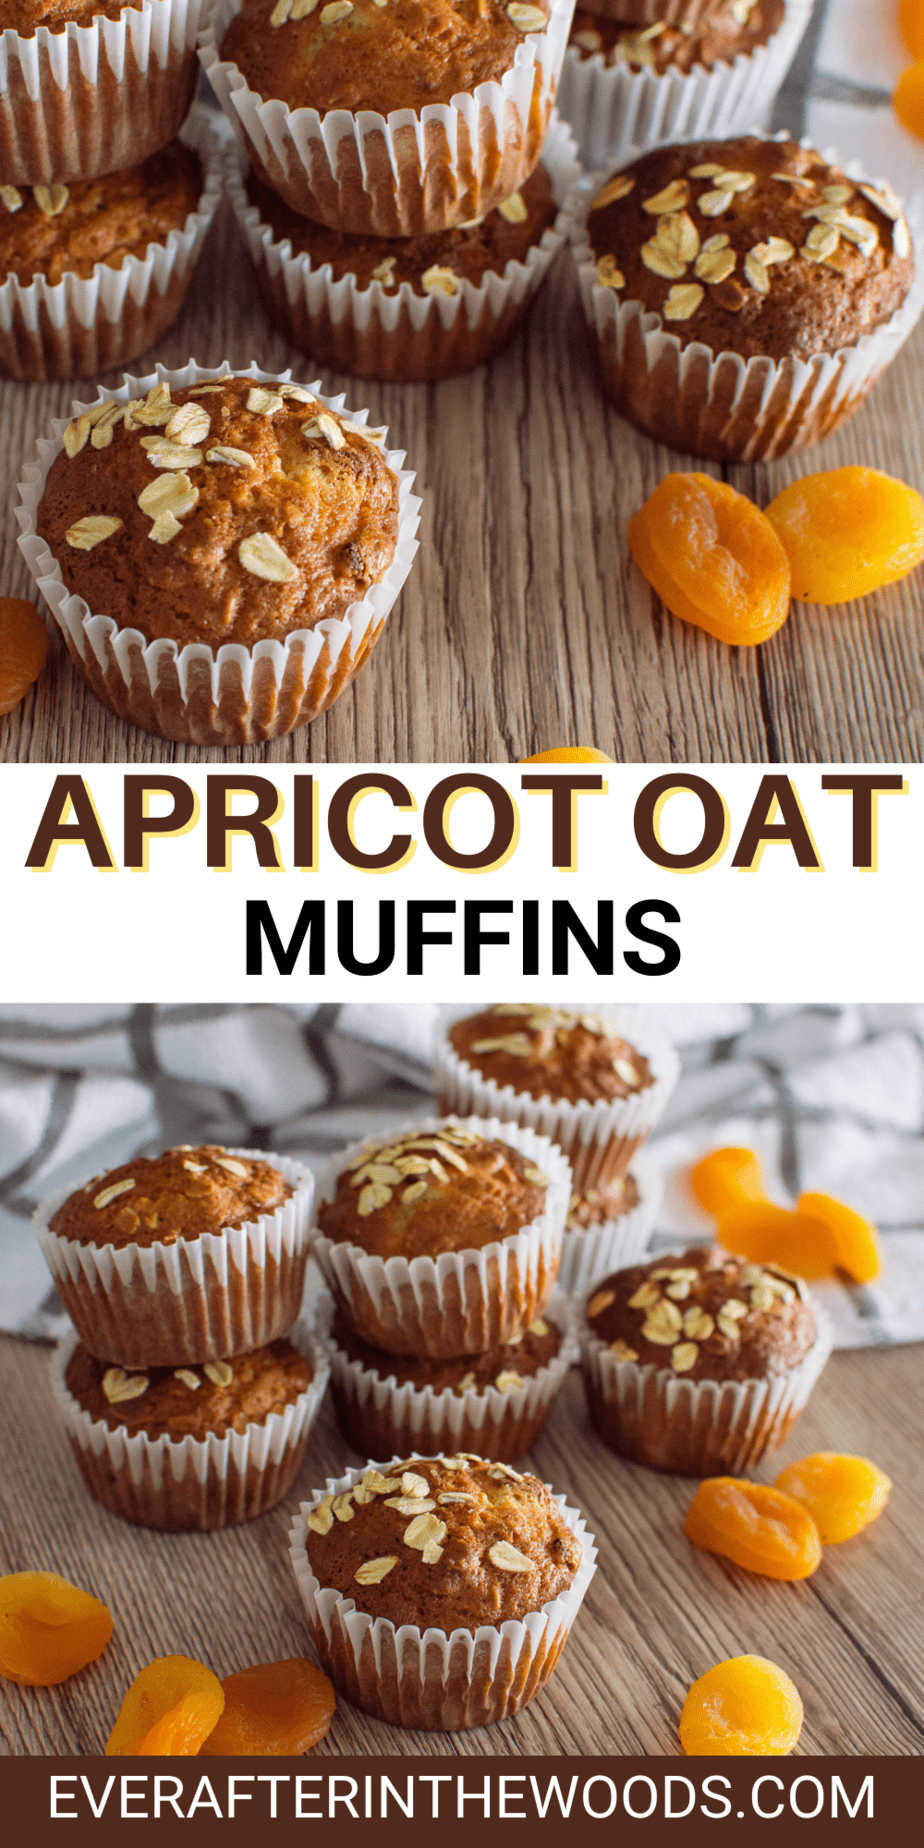 Most muffin recipes are relatively straightforward, but a few key tricks can improve your results. First, it’s important to use room-temperature eggs and dairy products in order to prevent them from curdling as they react with other ingredients. Also, make sure that you don’t overmix your batter: The best muffins have distinct pockets of air throughout. Finally, do not underbake!